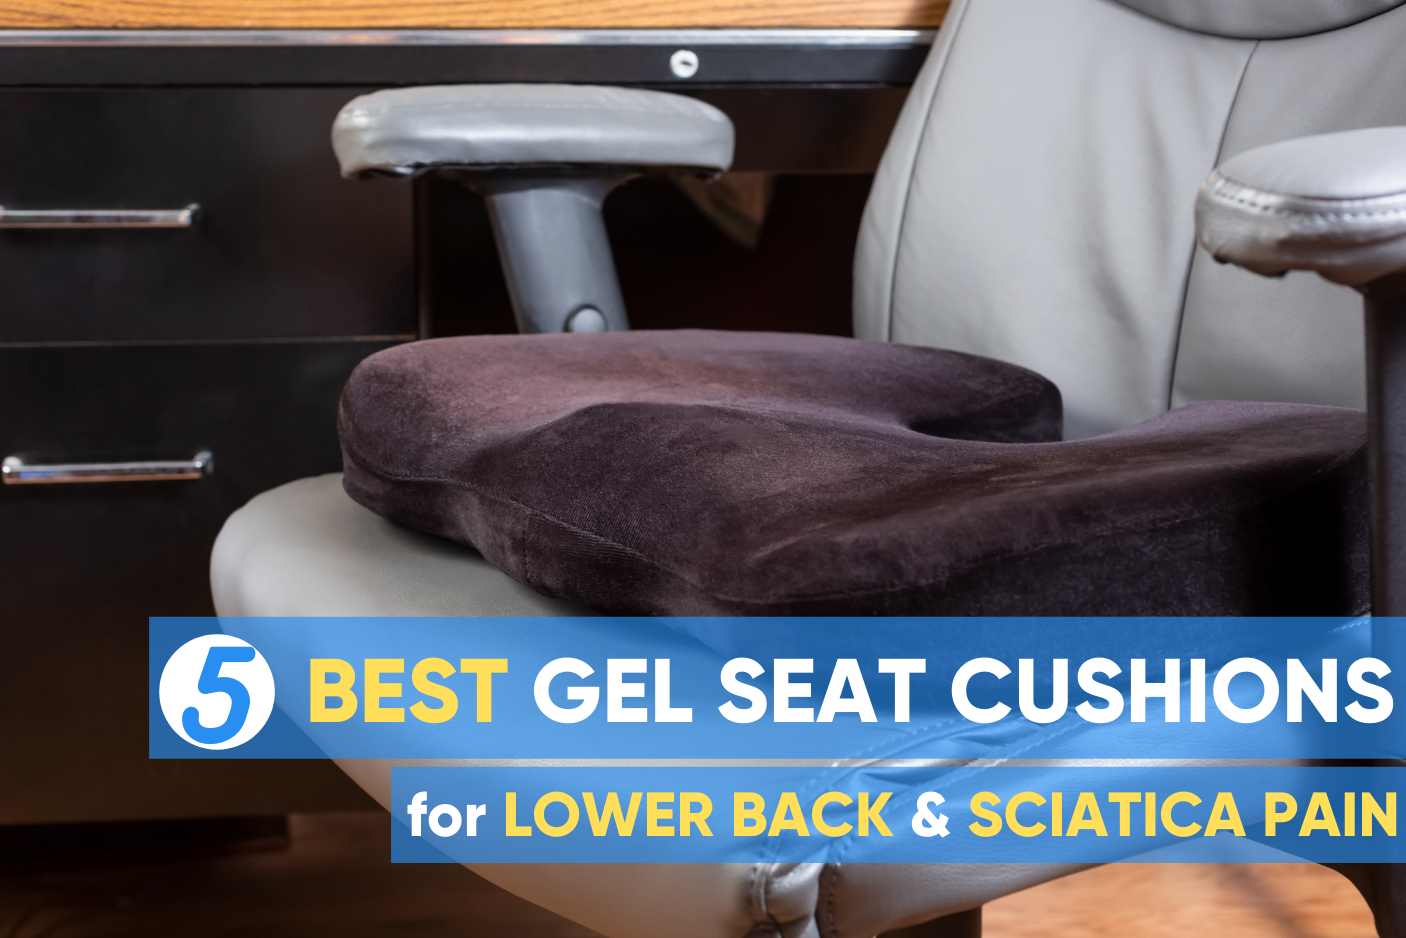 Top 5 Gel Seat Cushions for Lower Back & Sciatica Pain - Easy Posture